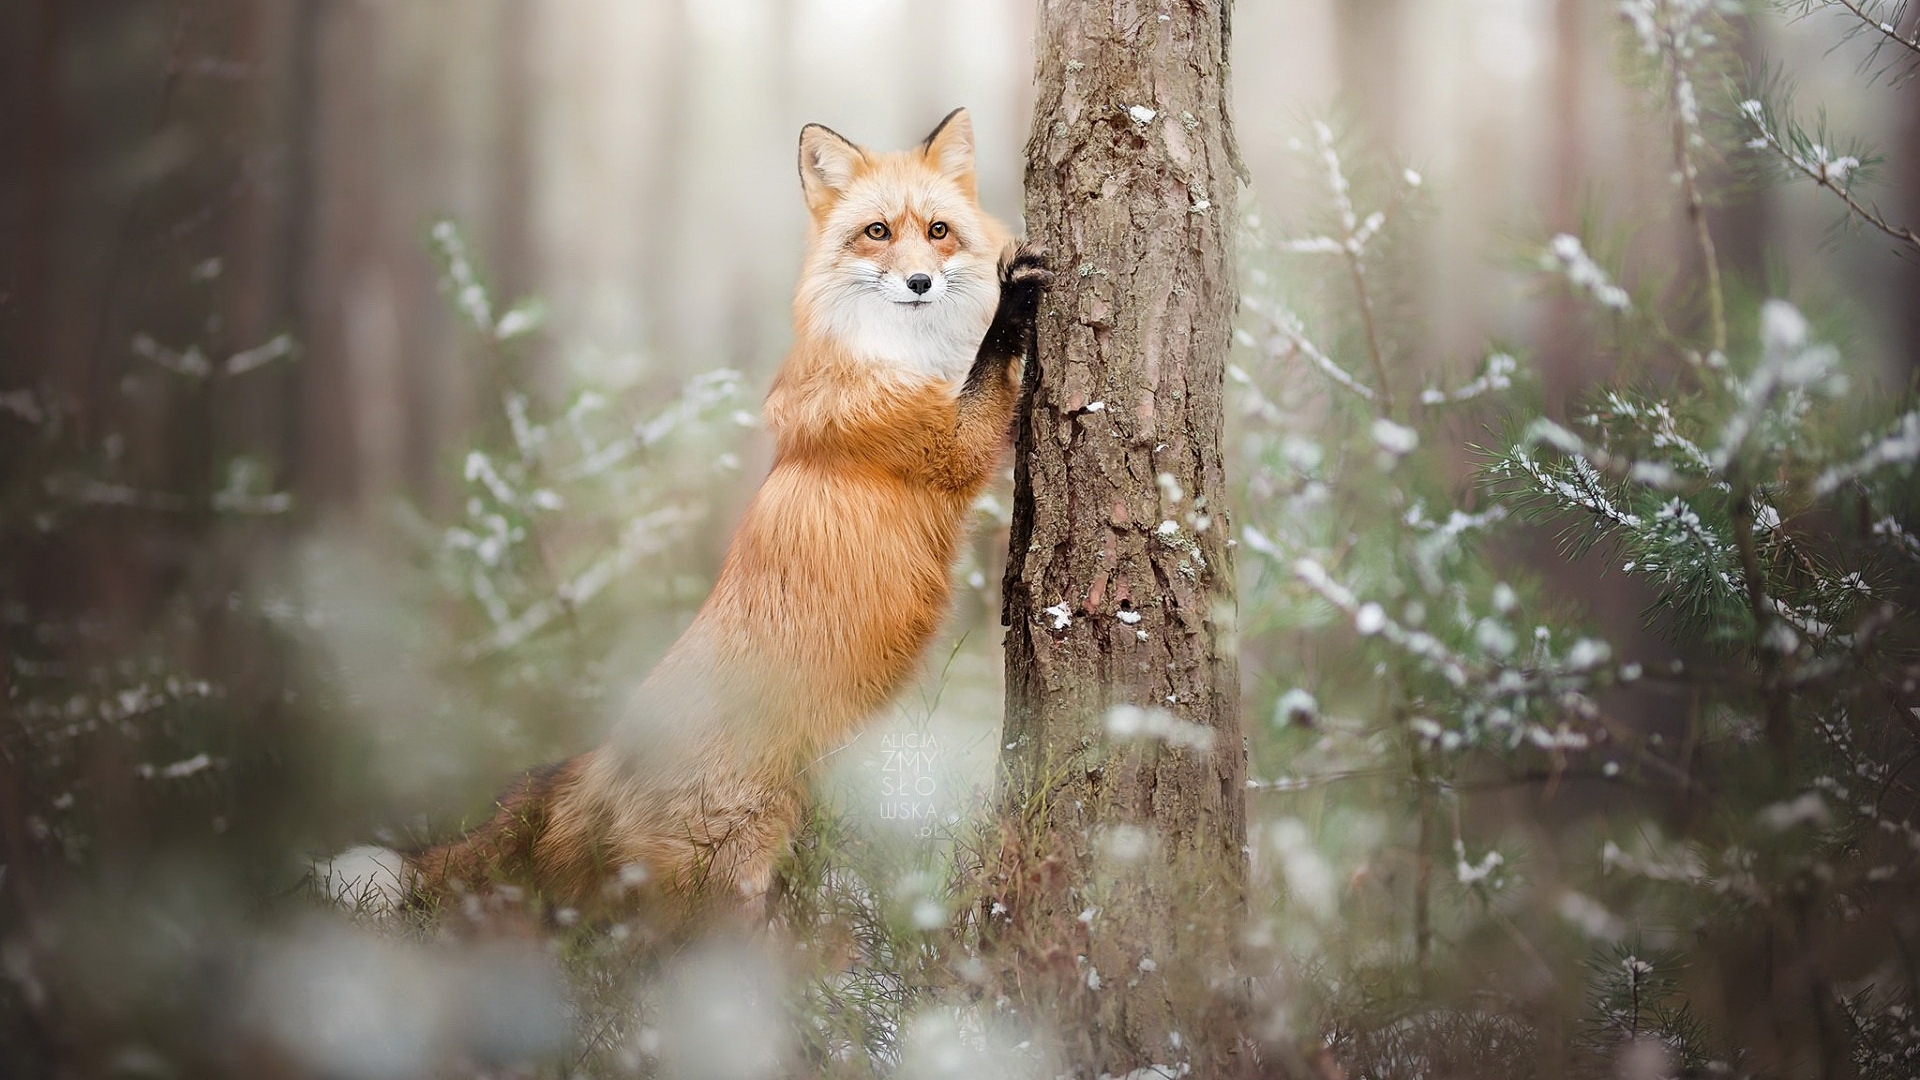 Image: Red, Fox, winter, forest, tree trunk, spruce, rests